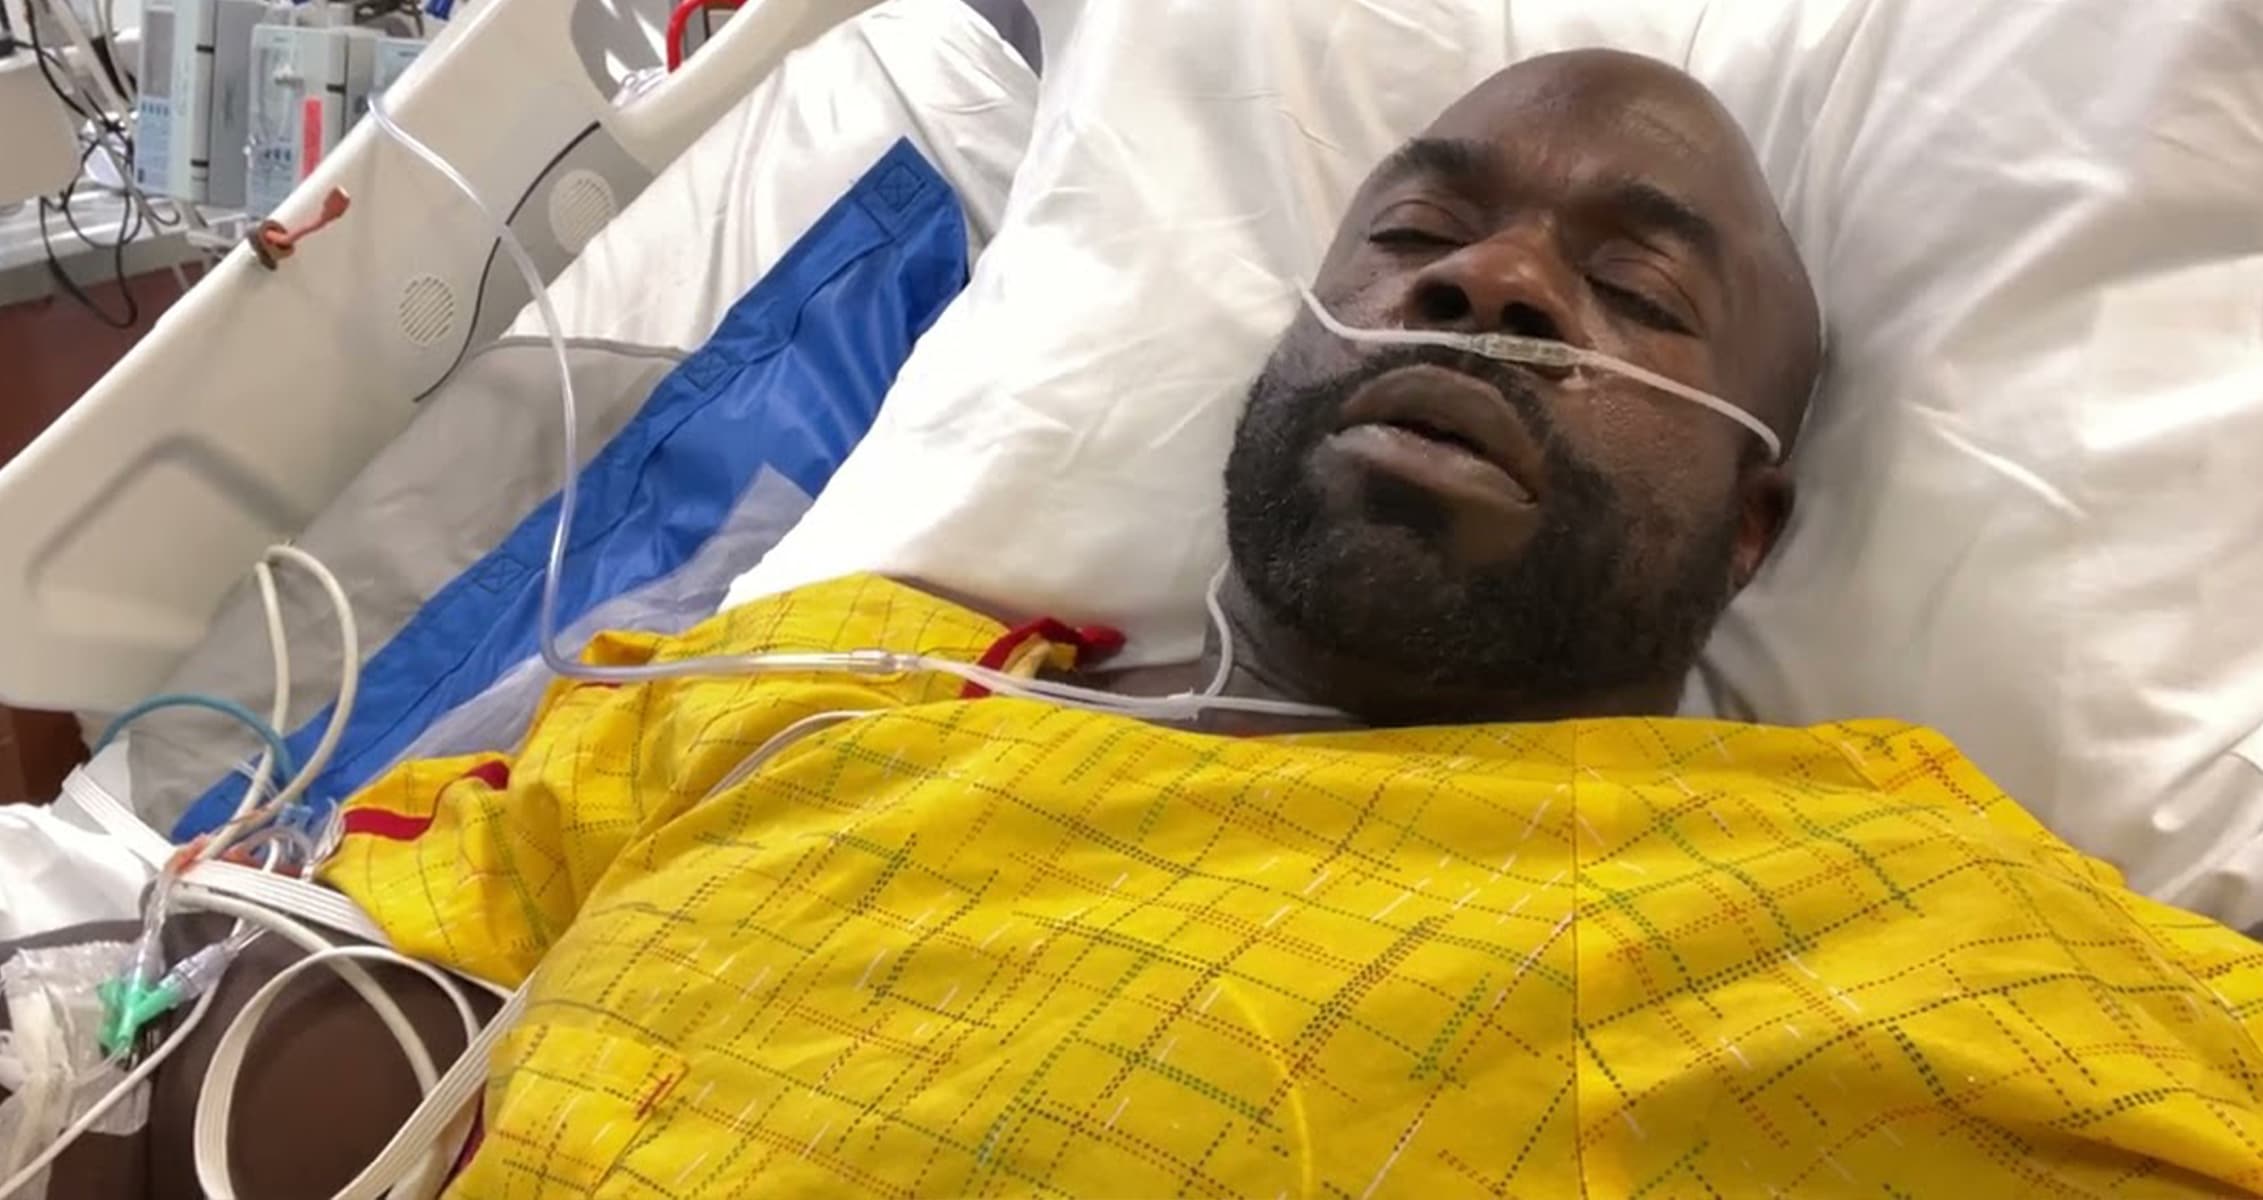 Kali Muscle Hospitalized After Suffering A Heart Attack